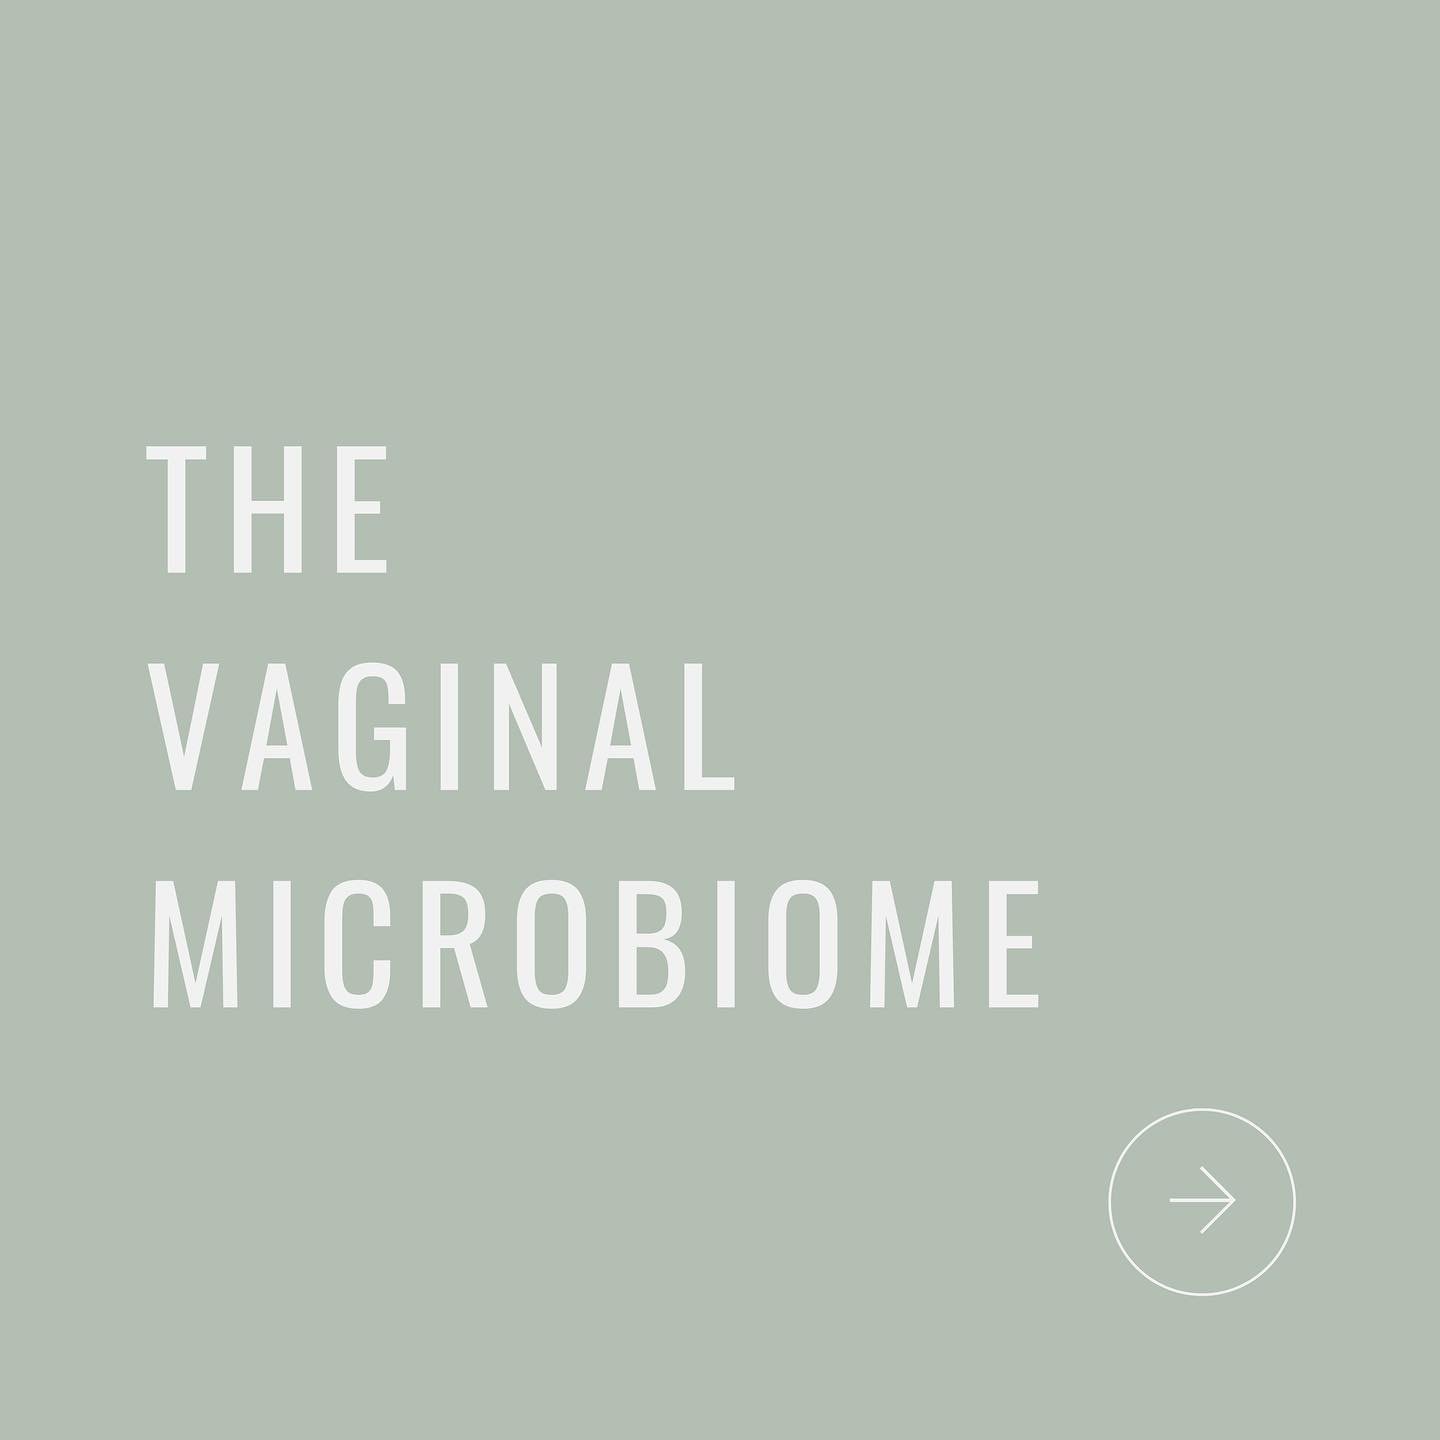 The vaginal microbiome is an incredibly resilient, yet sensitive environment that is important for our health and fertility. A &lsquo;healthy&rsquo; vagina is dominated by Lactobacillus species, whose role is to acidify the vaginal environment. This 